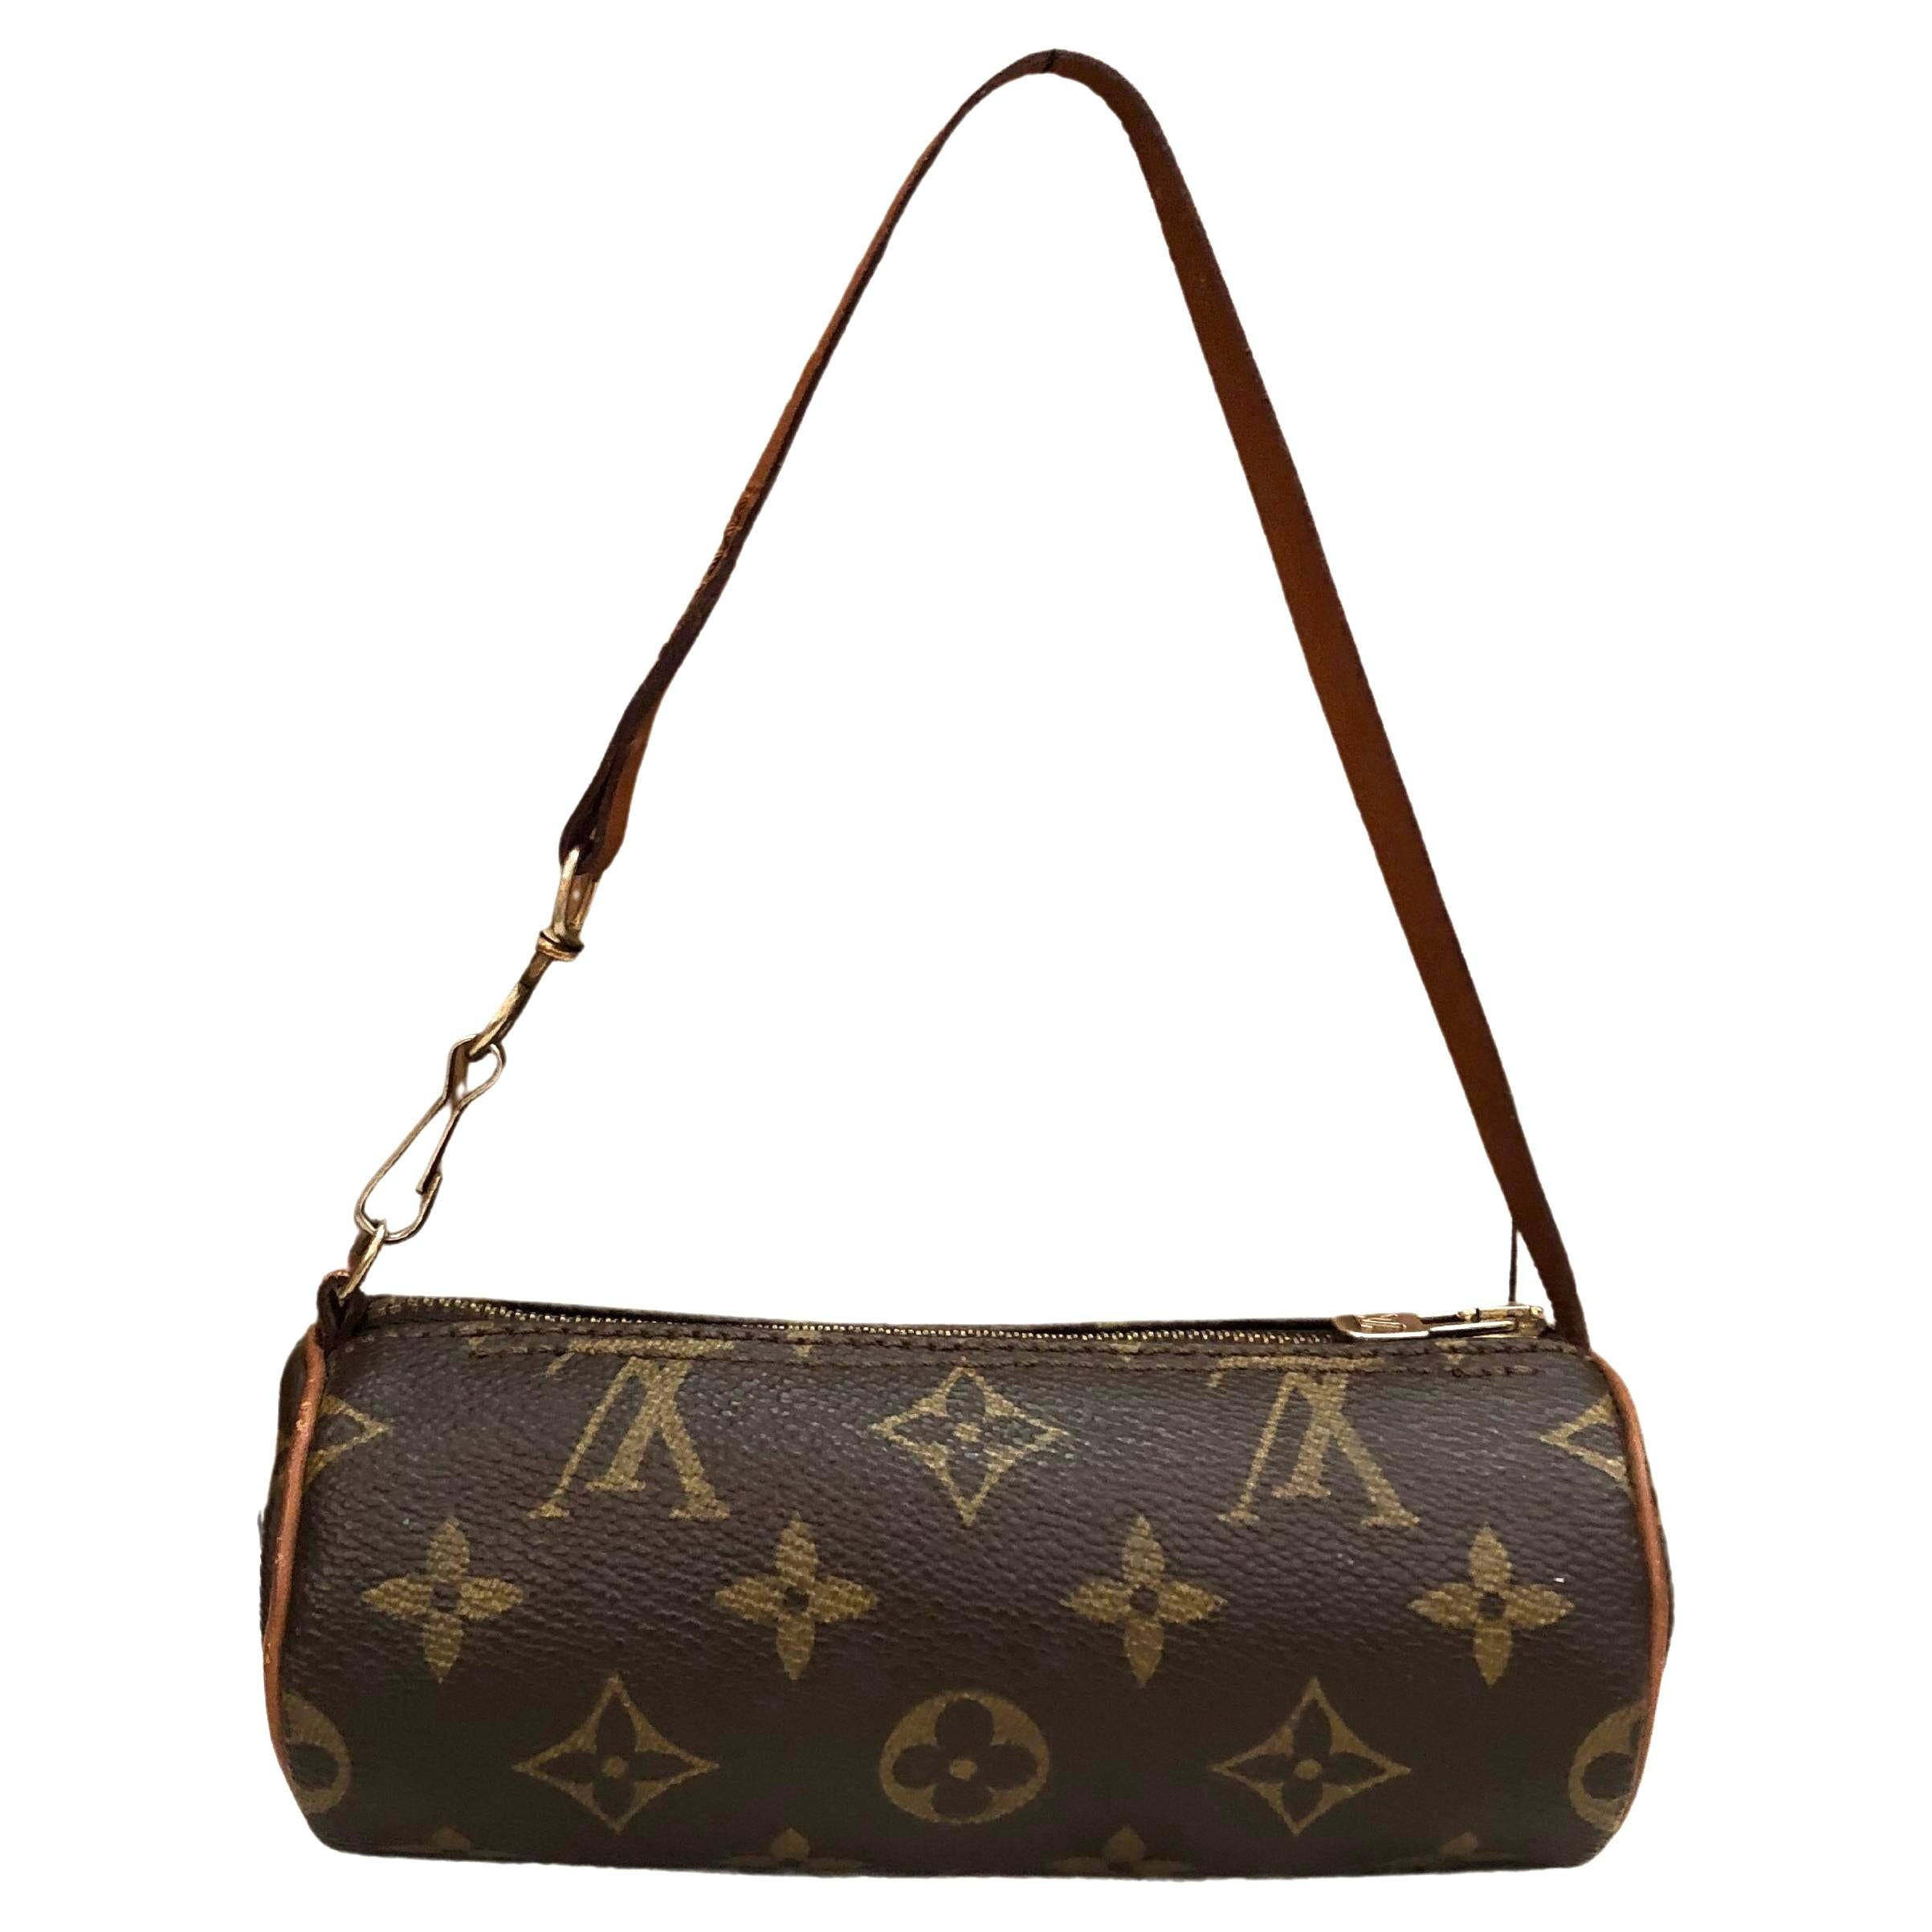 This vintage LOUIS VUITTON mini Papillon pouch is crafted of monogram canvas and leather in brown. Top zipper closure opens to a brown leather interior. Measures 6.25”x 2.25”x 2.25”. Comes with complimentary non-LV chain. 

Condition - Generally in